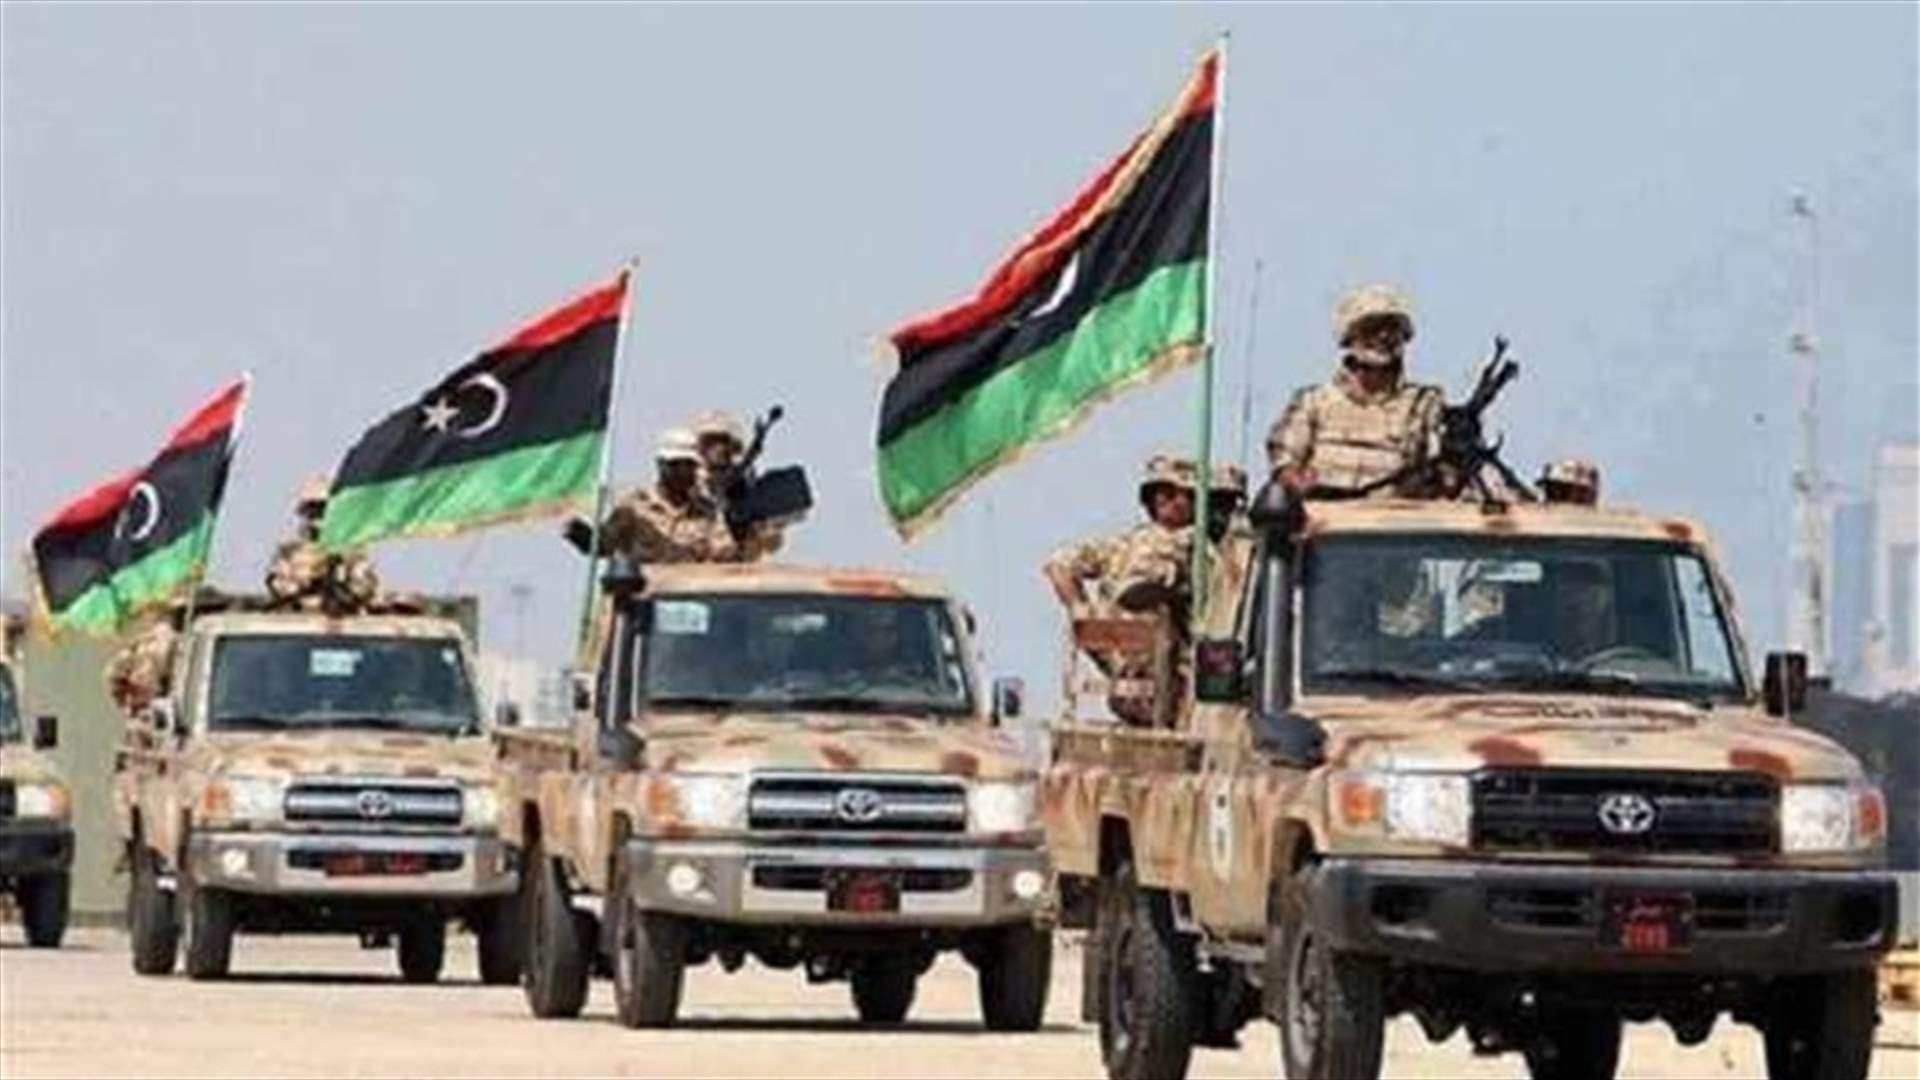 Libya forces say pushing back Islamic State fighters